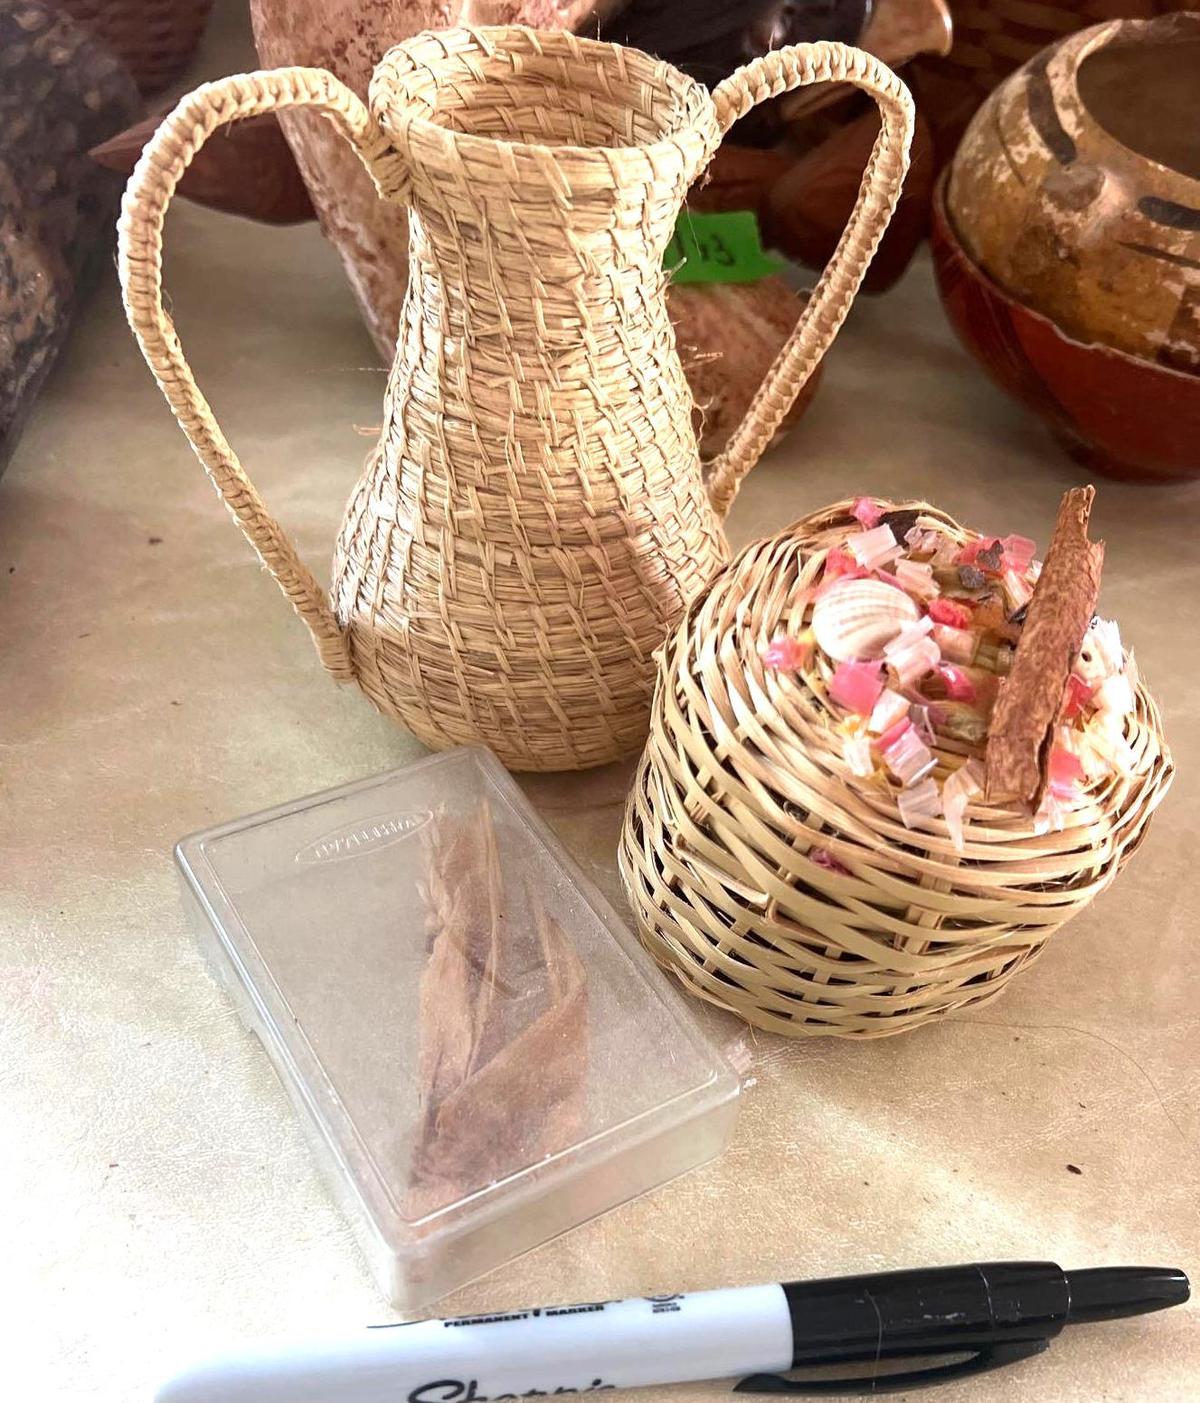 Indian woven baskets and vase